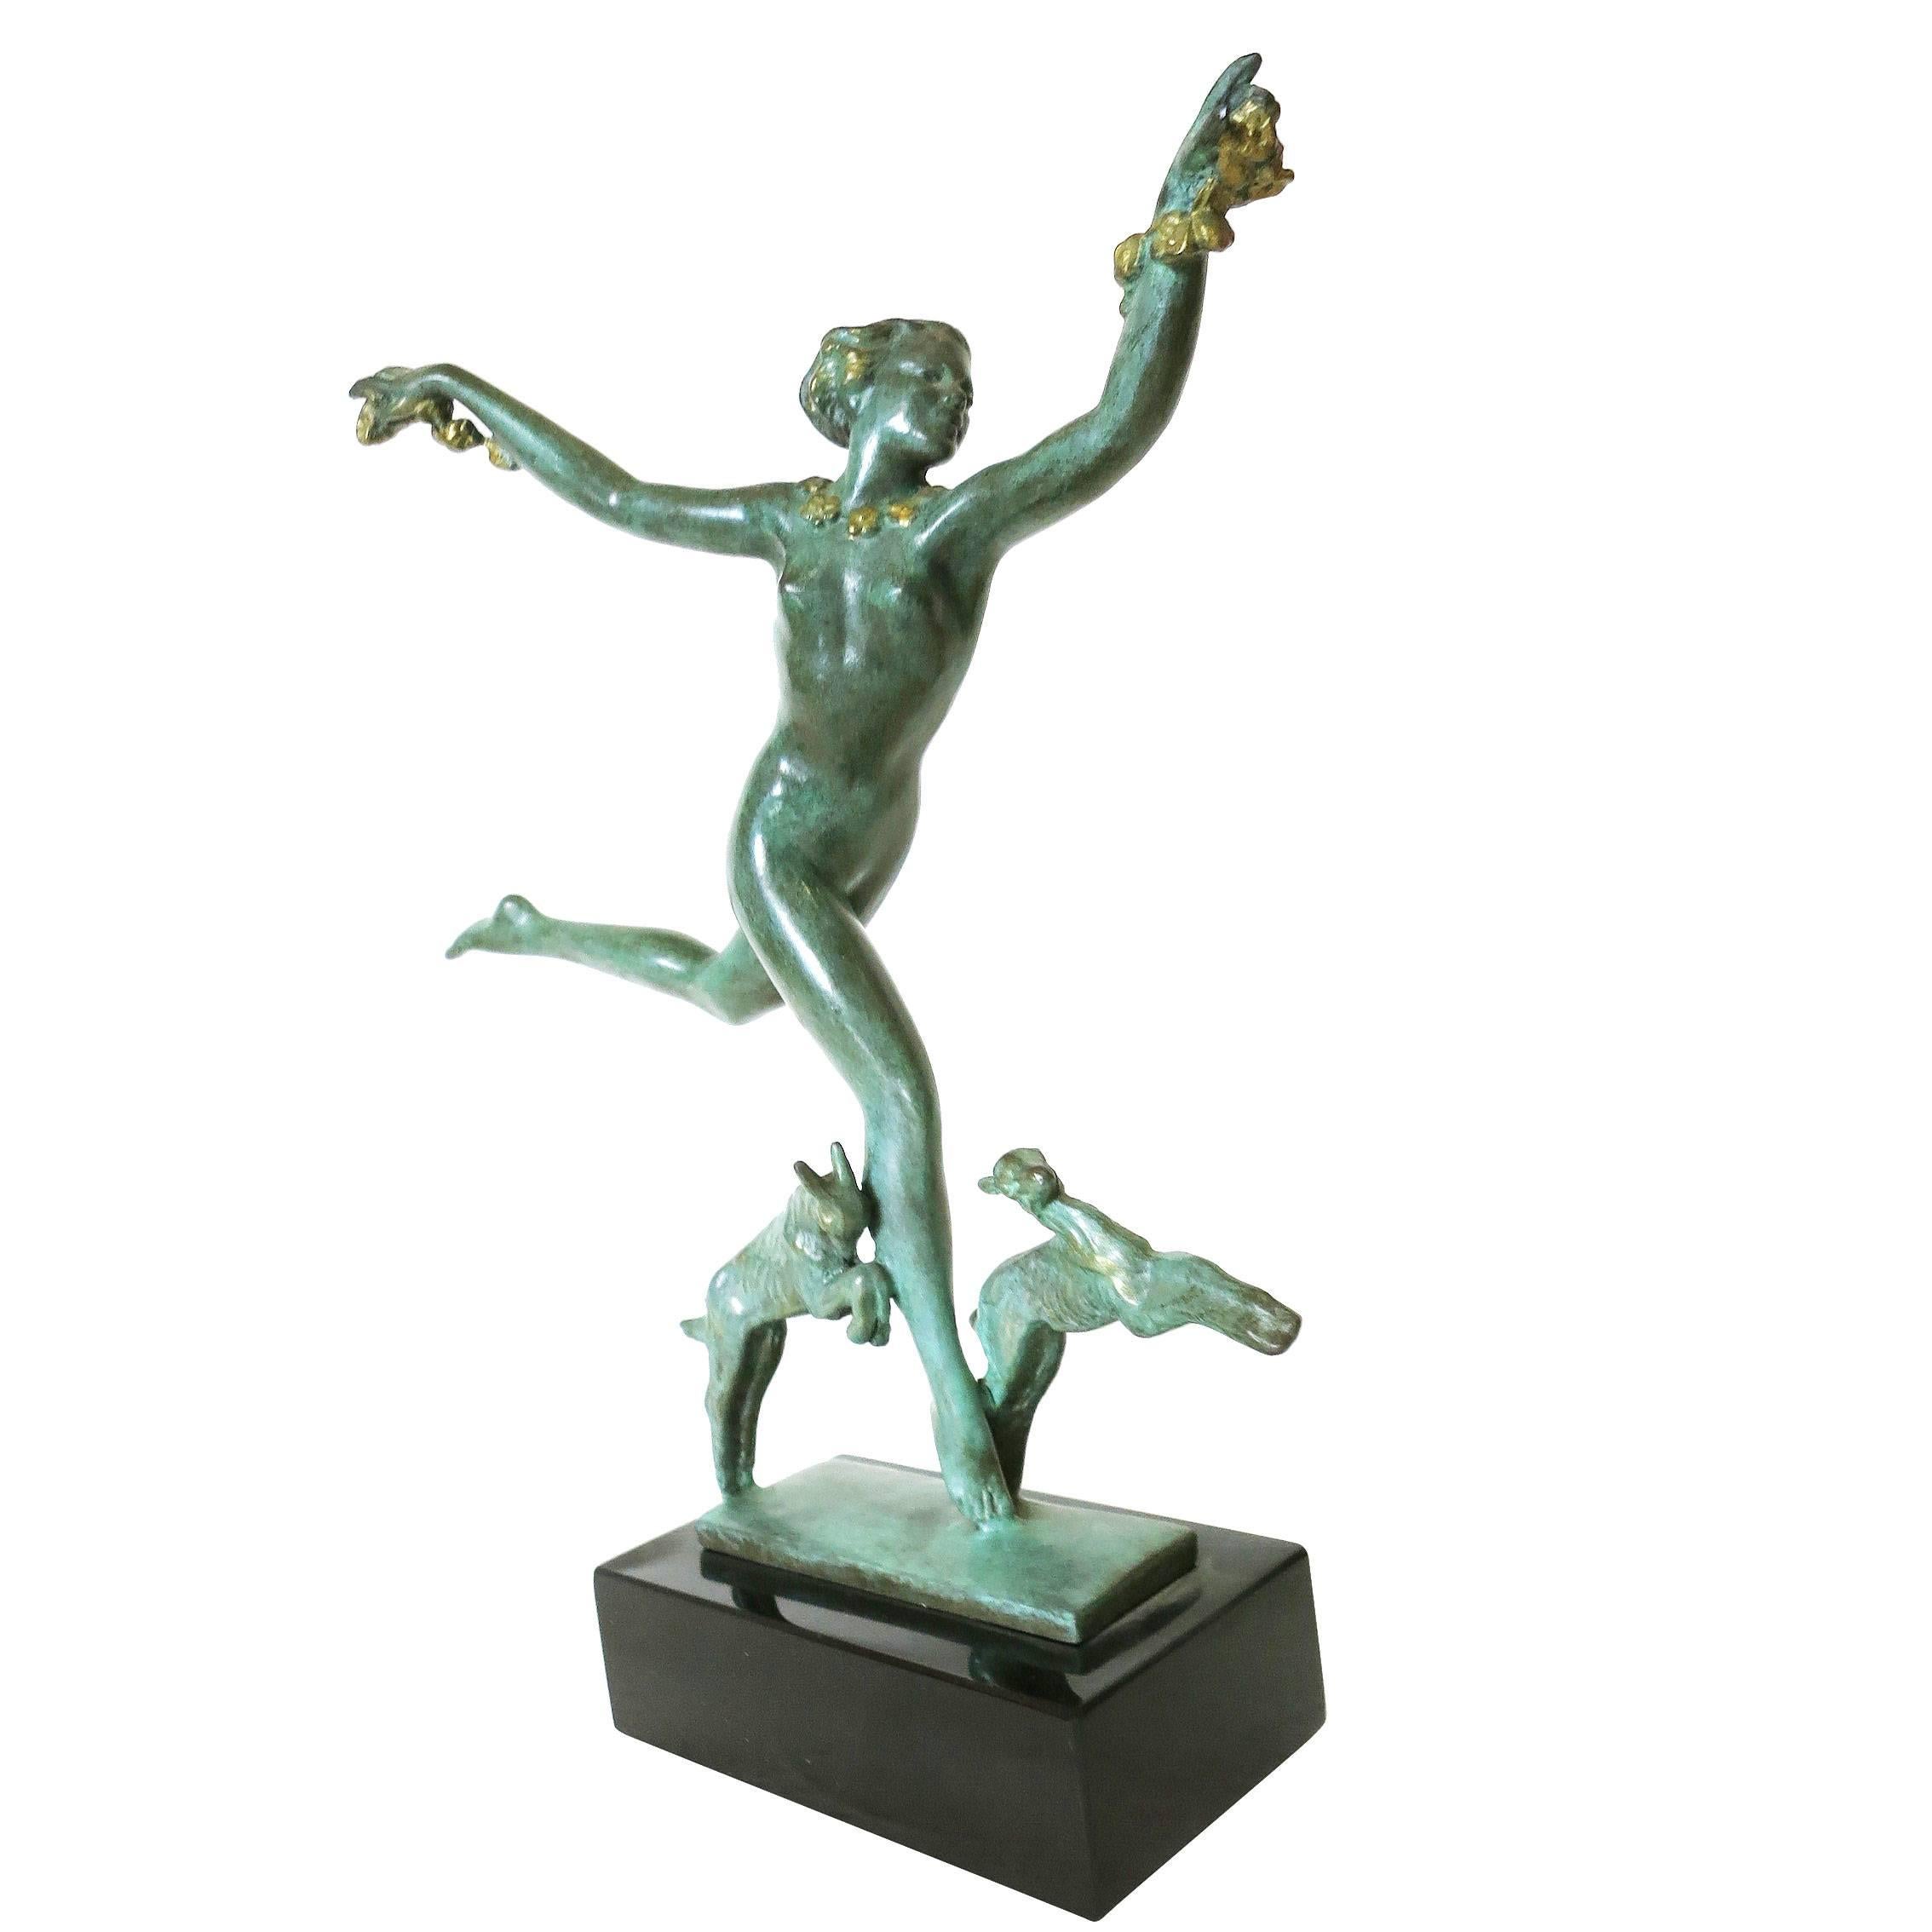 Art Deco style solid bronze casting with an antique green patina finish of a nude female nymph dancing standing on a mirror polished black marble base.

Product handcrafted in the USA with the highest quality materials and over 30 years of